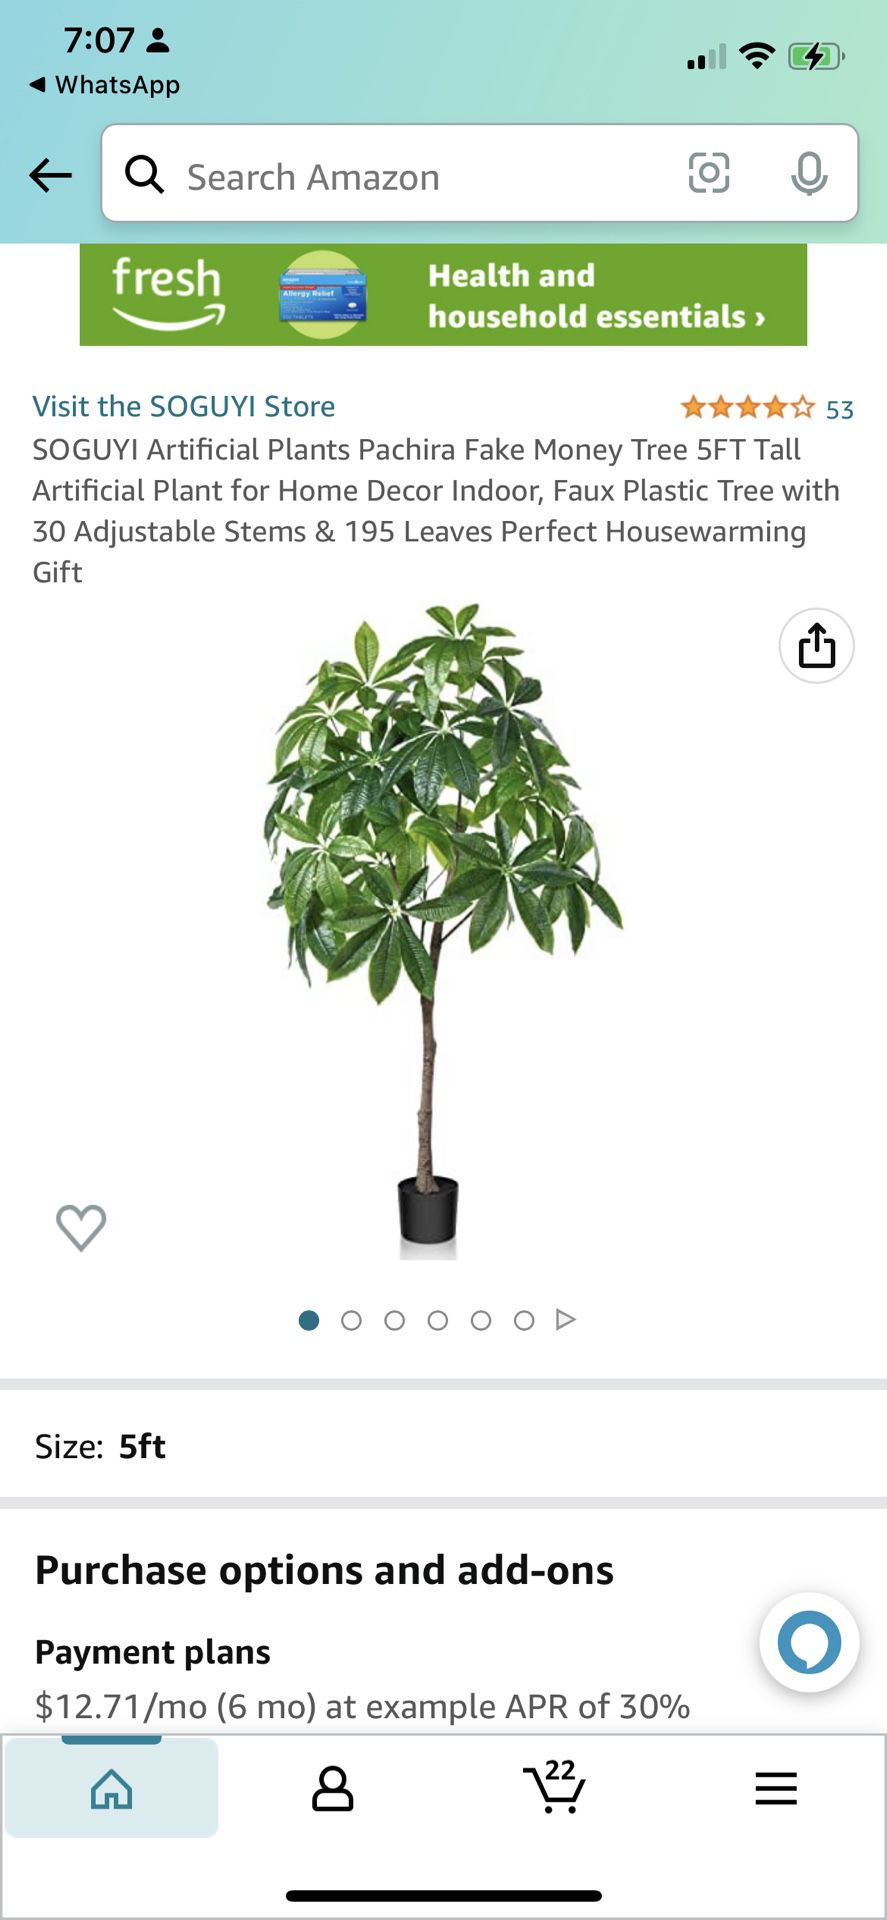 SOGUYI Artificial Plants Pachira Fake Money Tree 5FT Tall Artificial Plant for Home Decor Indoor, Faux Plastic Tree with 30 Adjustable Stems & 195 Lea